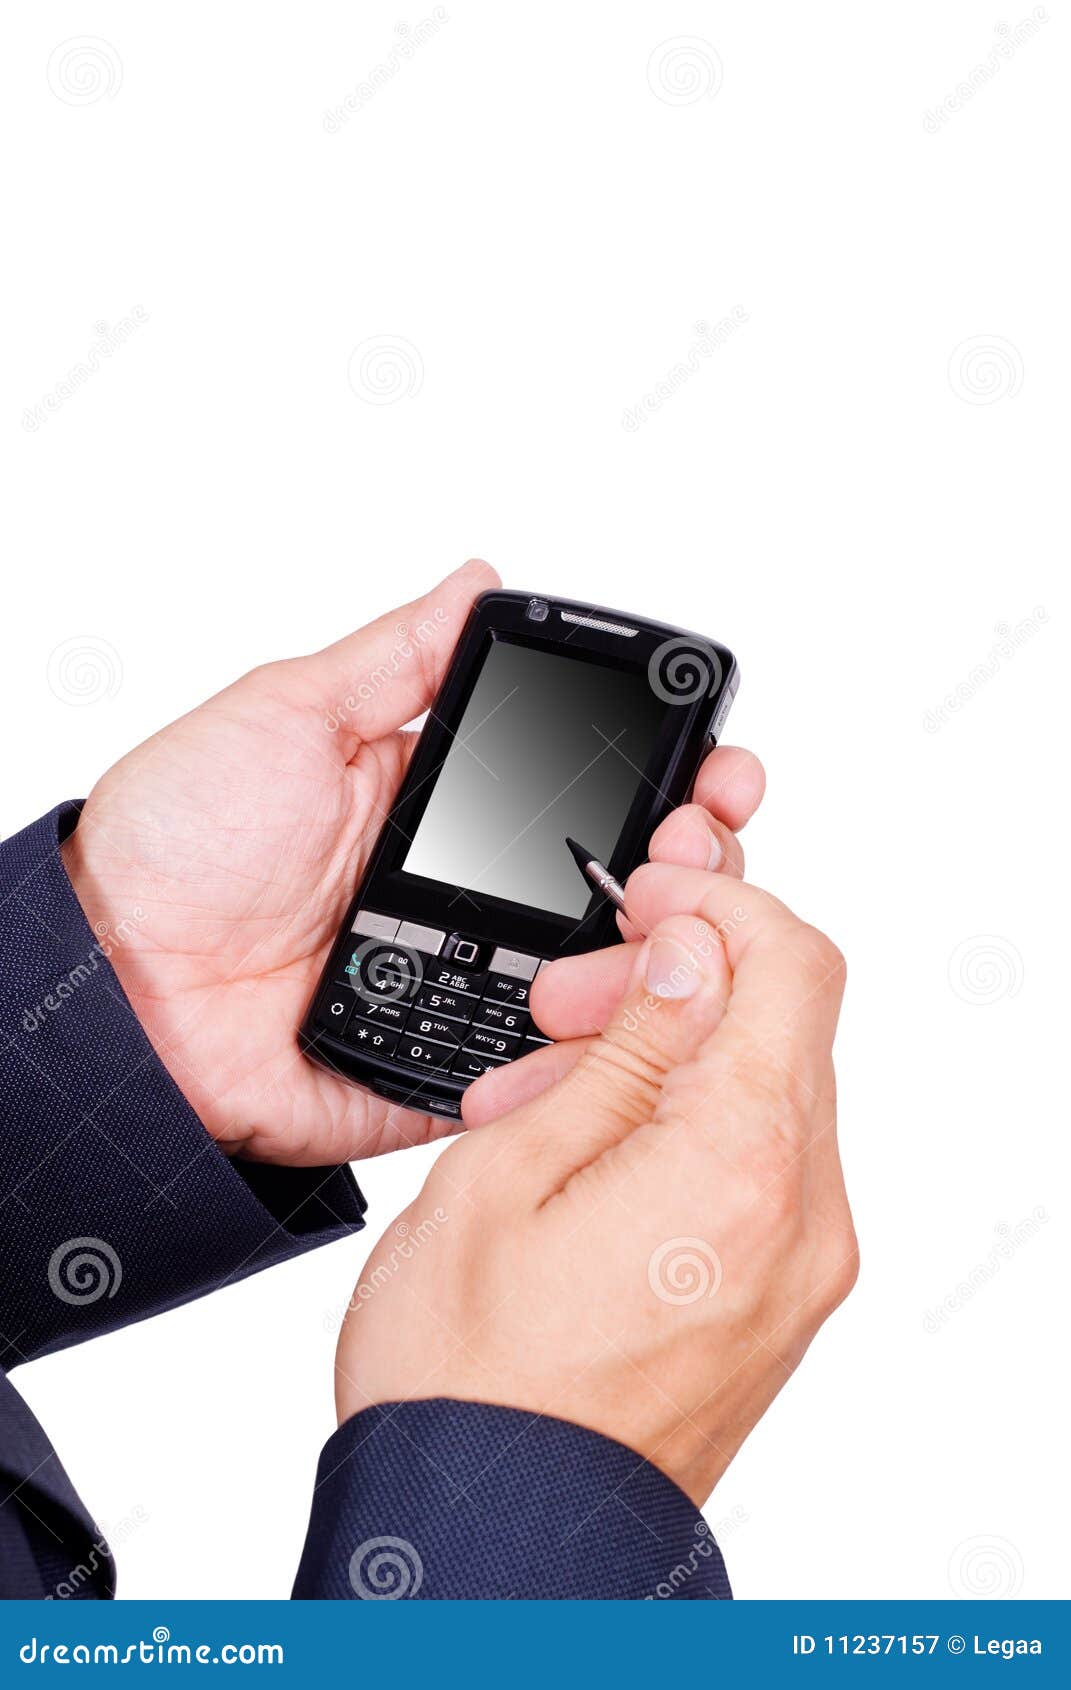 Hands Working on Mobile Telephone Stock Image - Image of black ...